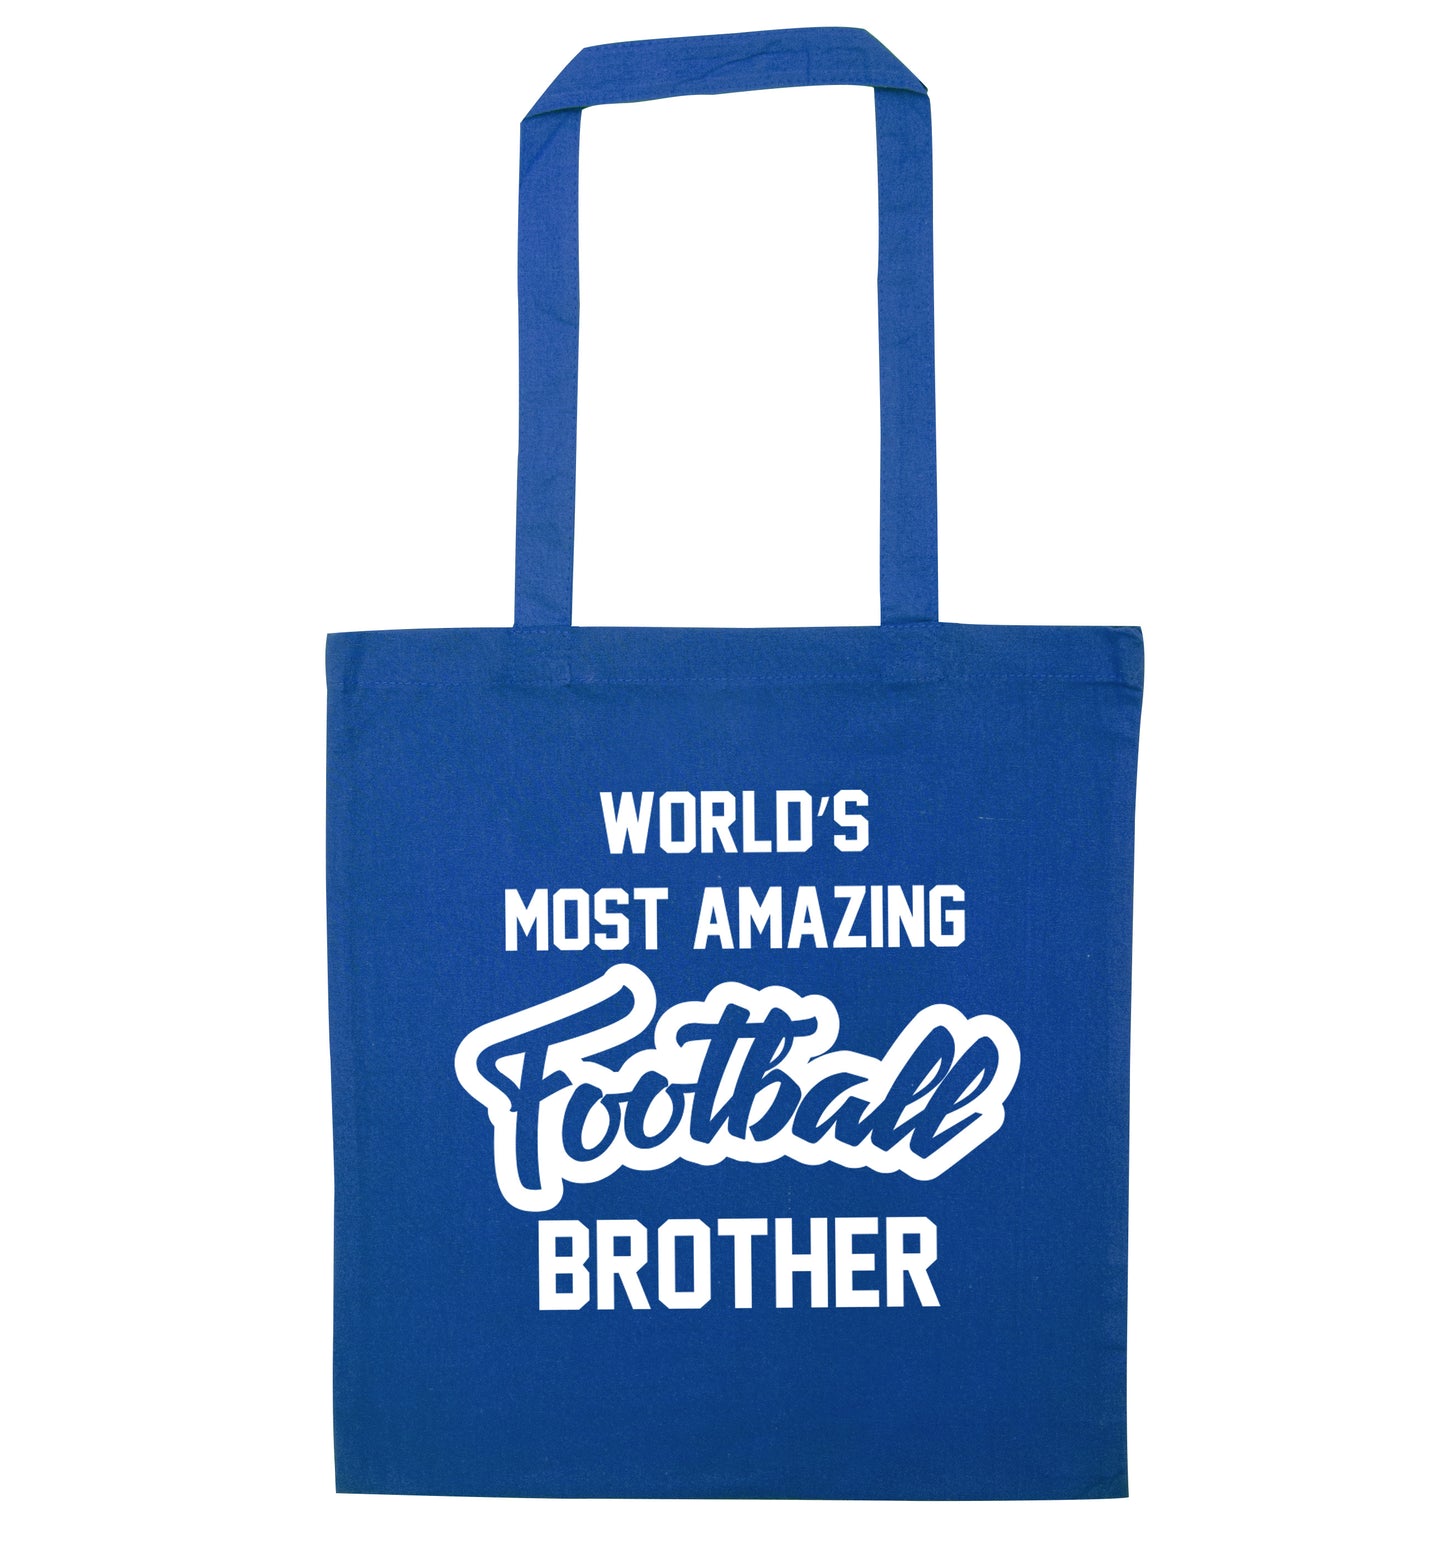 Worlds most amazing football brother blue tote bag